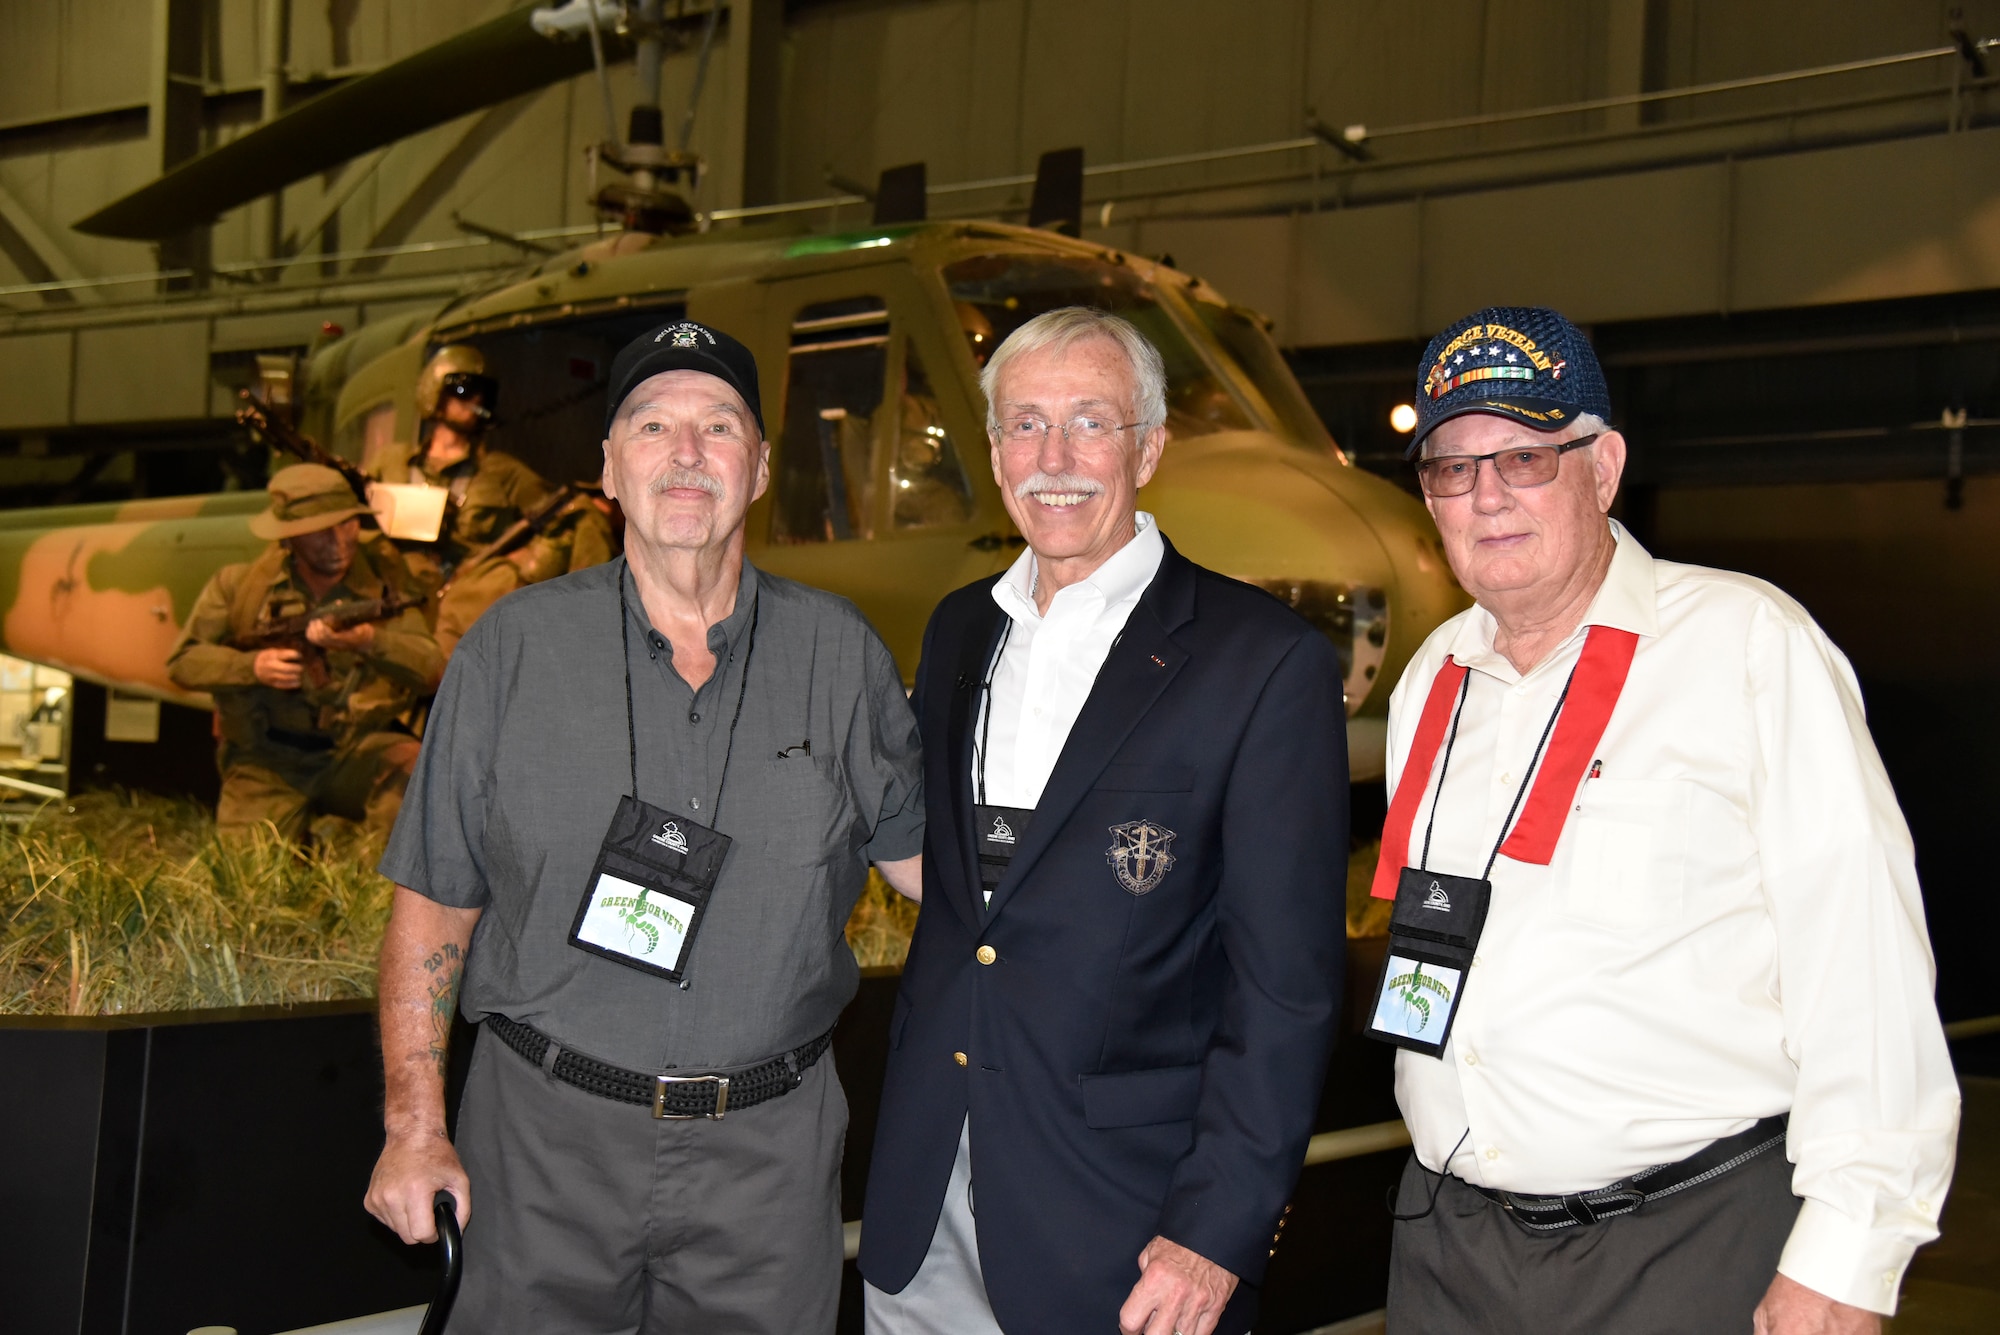 DAYTON, Ohio -- (From left to right) SSgt. Paul Jensen, Capt. Randy Harrison, MSgt.(Ret.) Fred Cook stand in front of the Secret War diorama in the Southeast Asia War Gallery at the National Museum of the U.S. Air Force on Sept. 15, 2016. These veterans took part in the 26 Nov 1968 mission that is depicted in the National Museum of the U.S. Air Force’s UH-1P, 20th SOS “Green Hornets,” legacy diorama display. (U.S. Air Force photo by Ken LaRock)
